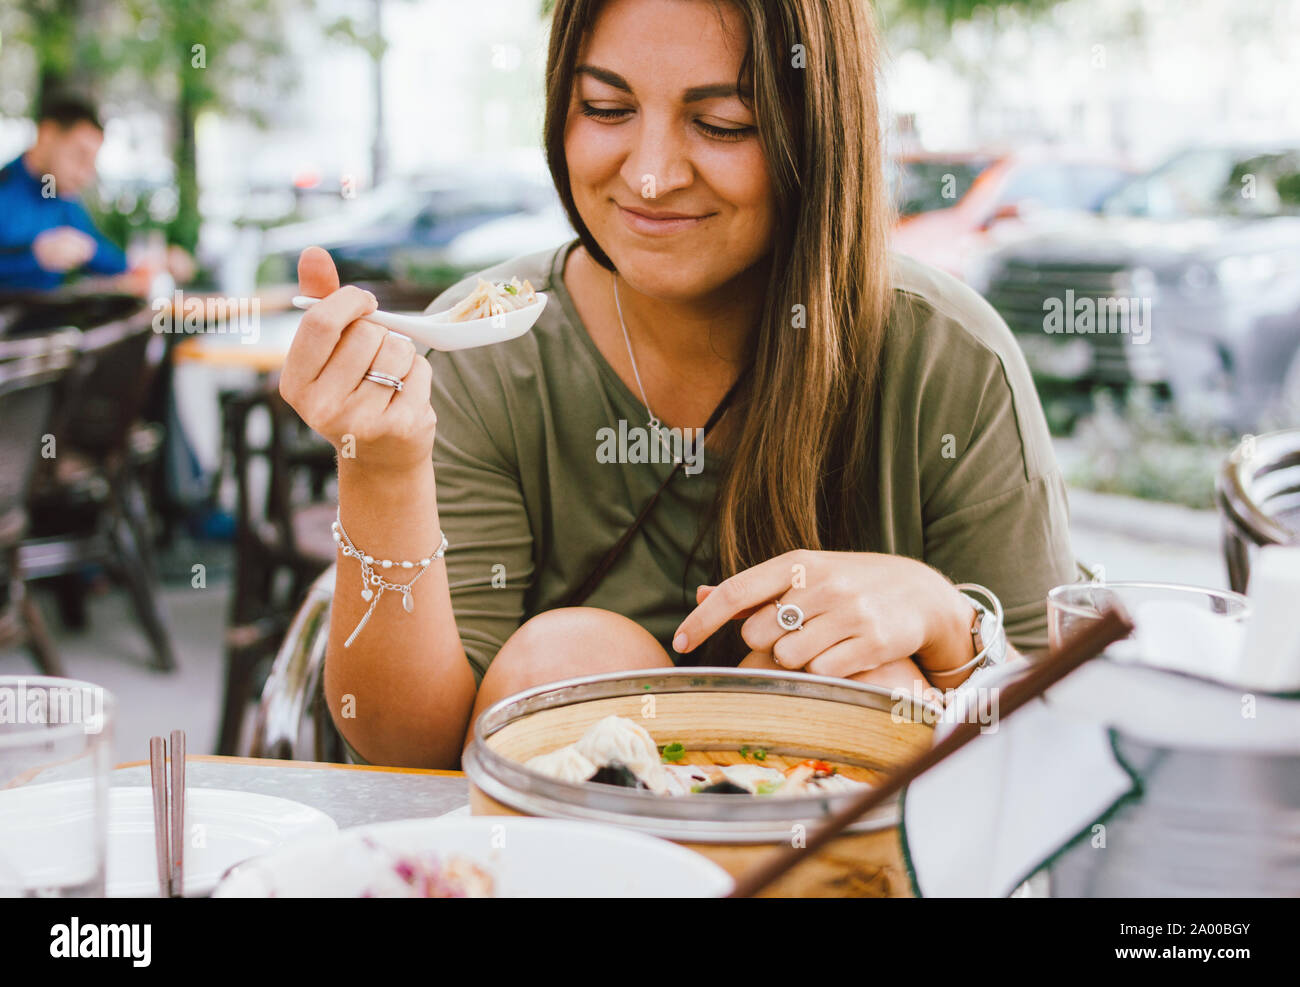 Young smiling brunette girl eating dim sum in a street cafe Stock Photo